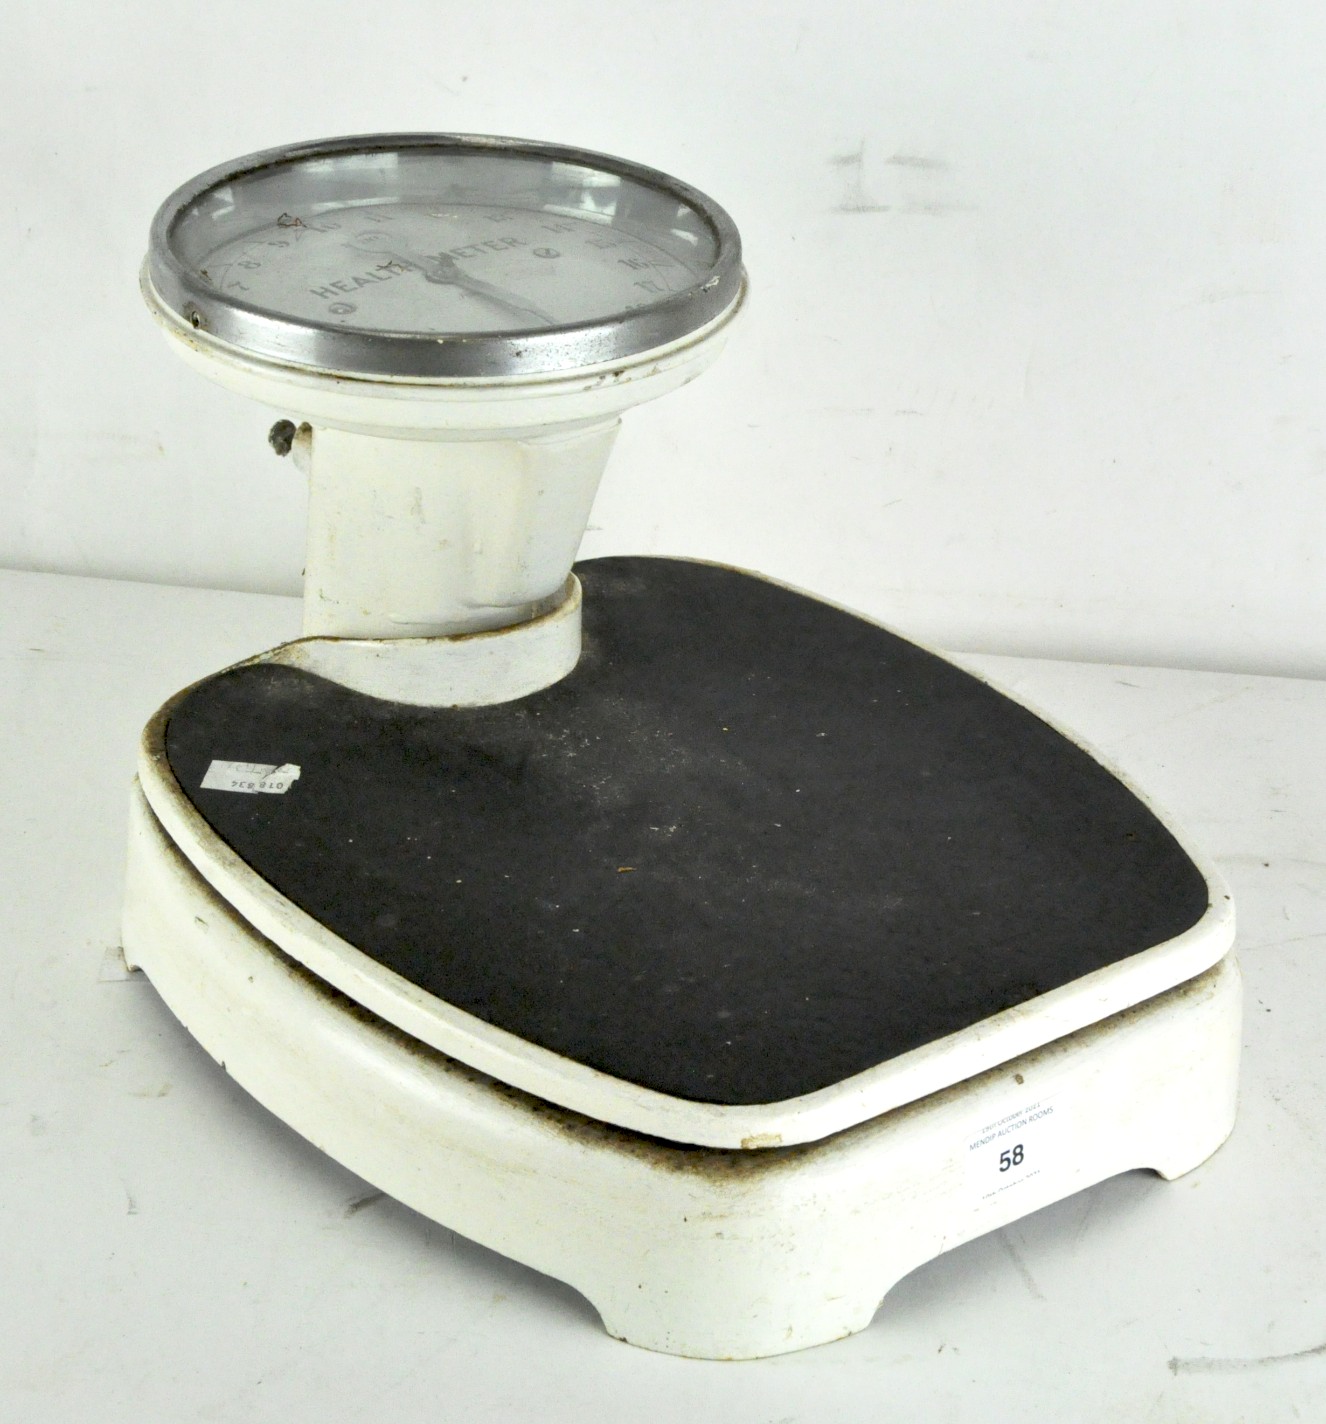 A vintage set of weighing scales "Healthmeter" measuring in stone,